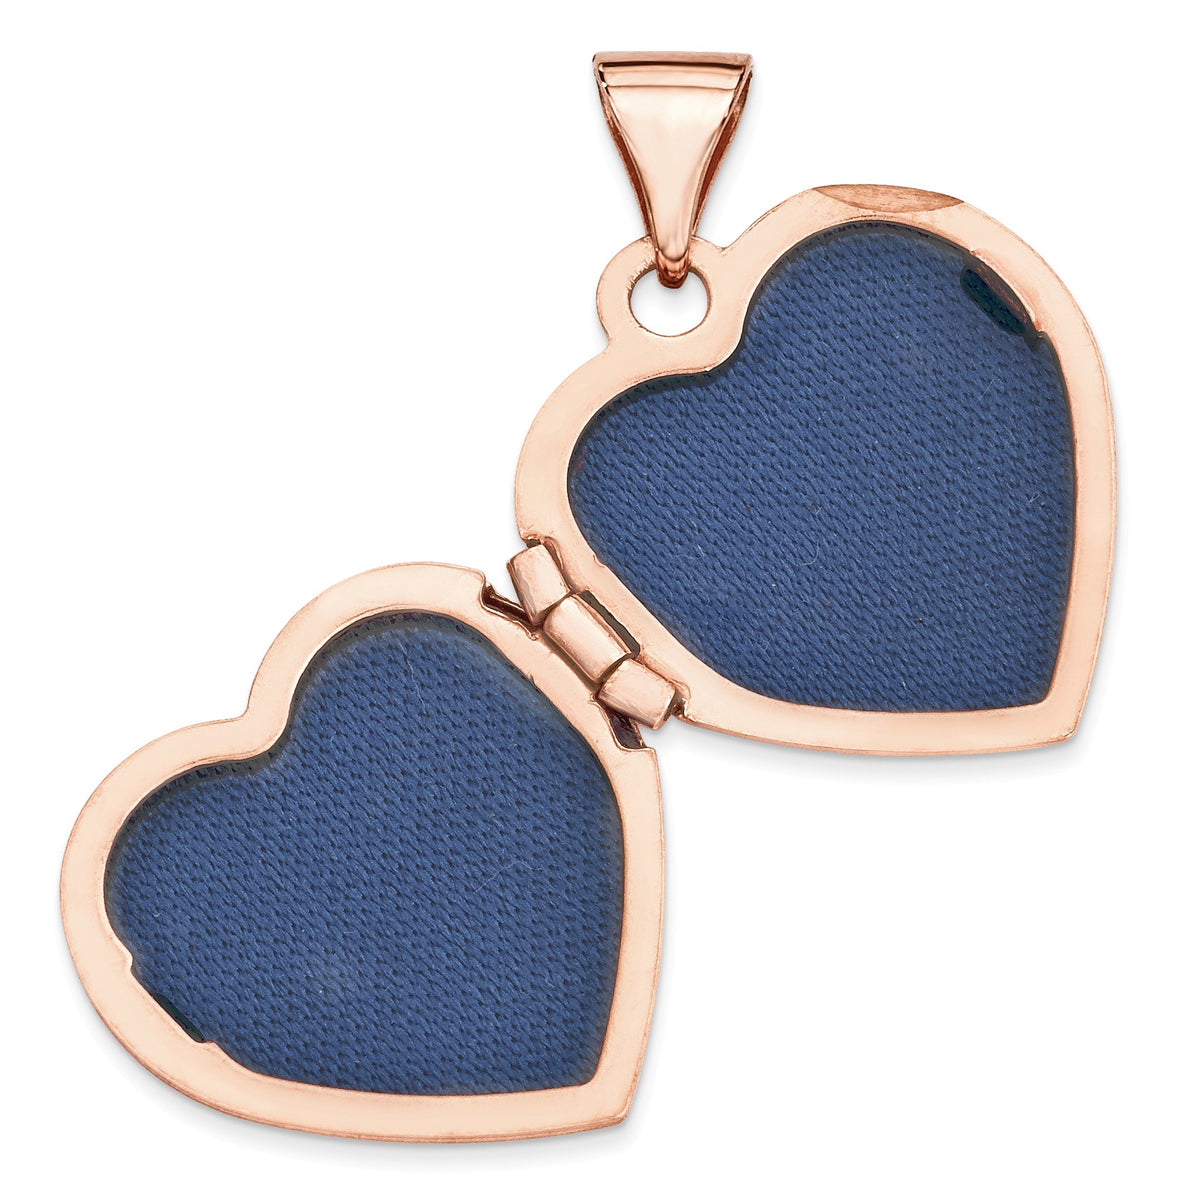 Alternate view of the 15mm Diamond Star Design Heart Shaped Locket in 14k Rose Gold by The Black Bow Jewelry Co.